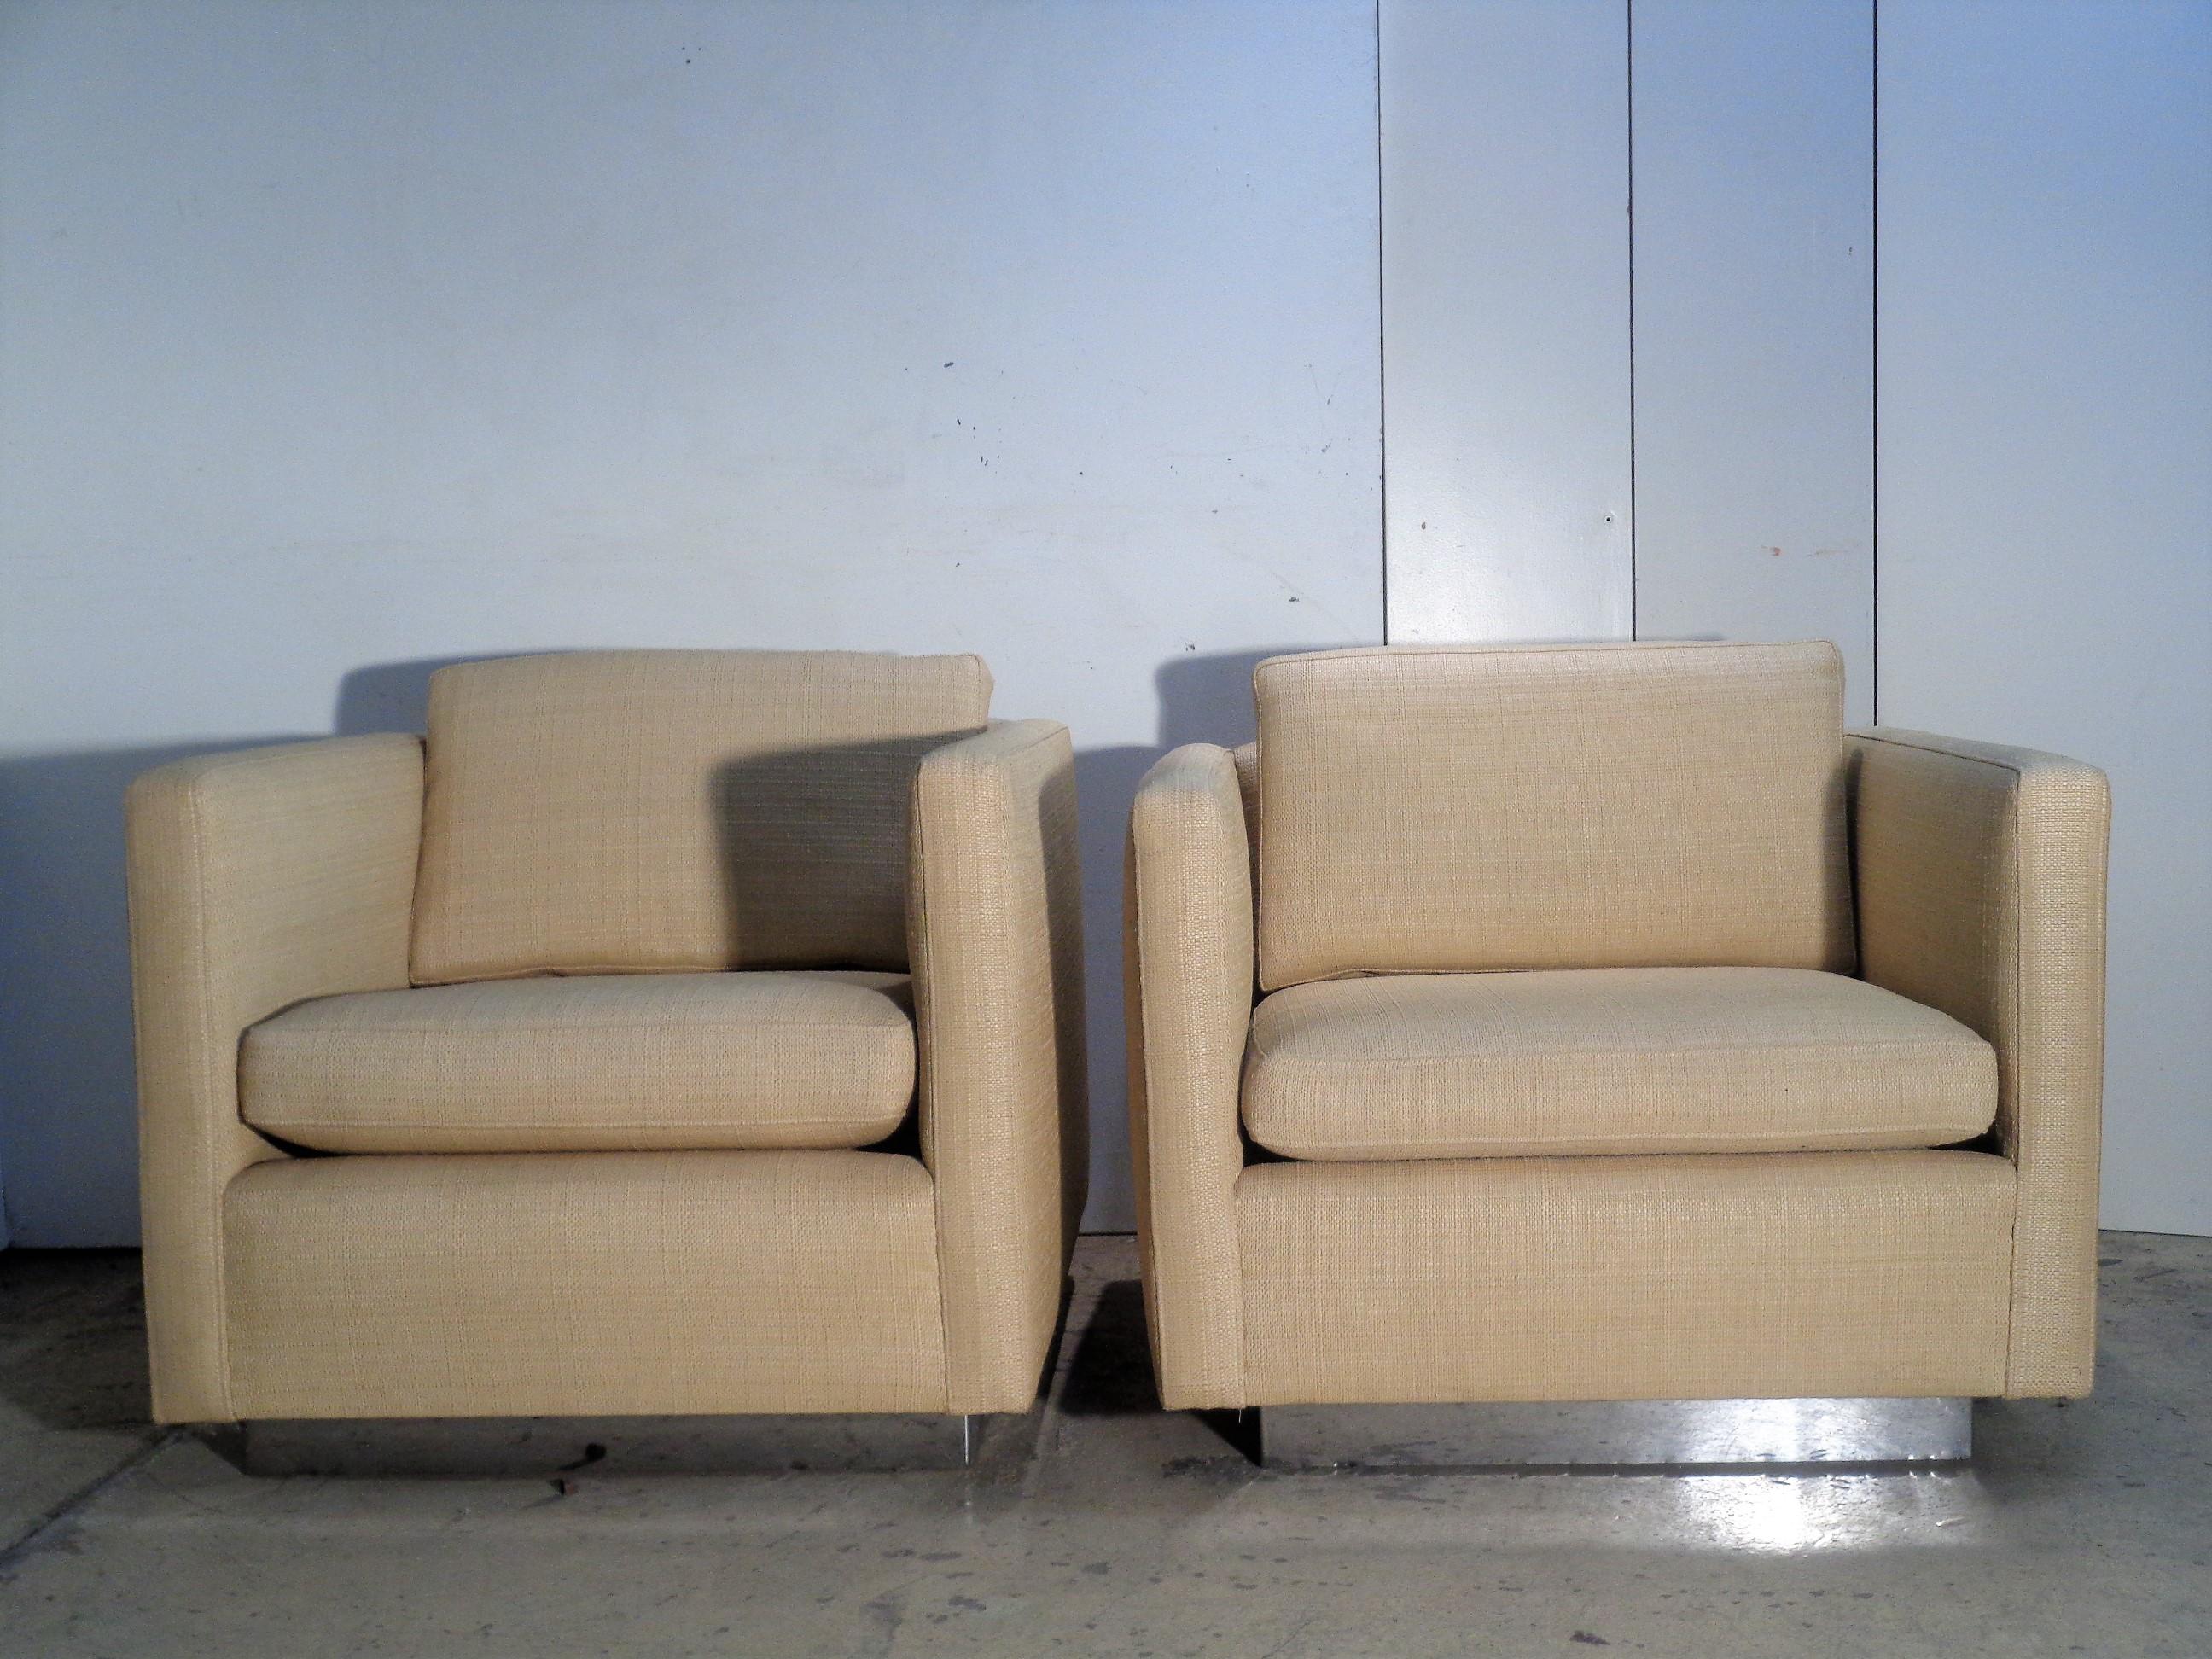 A great looking pair of Milo Baughman style floating cube lounge chairs with recessed chrome bases. Chairs were redone in a beautiful high quality custom grass cloth upholstery about fifteen years ago and have seen very little use since that time.